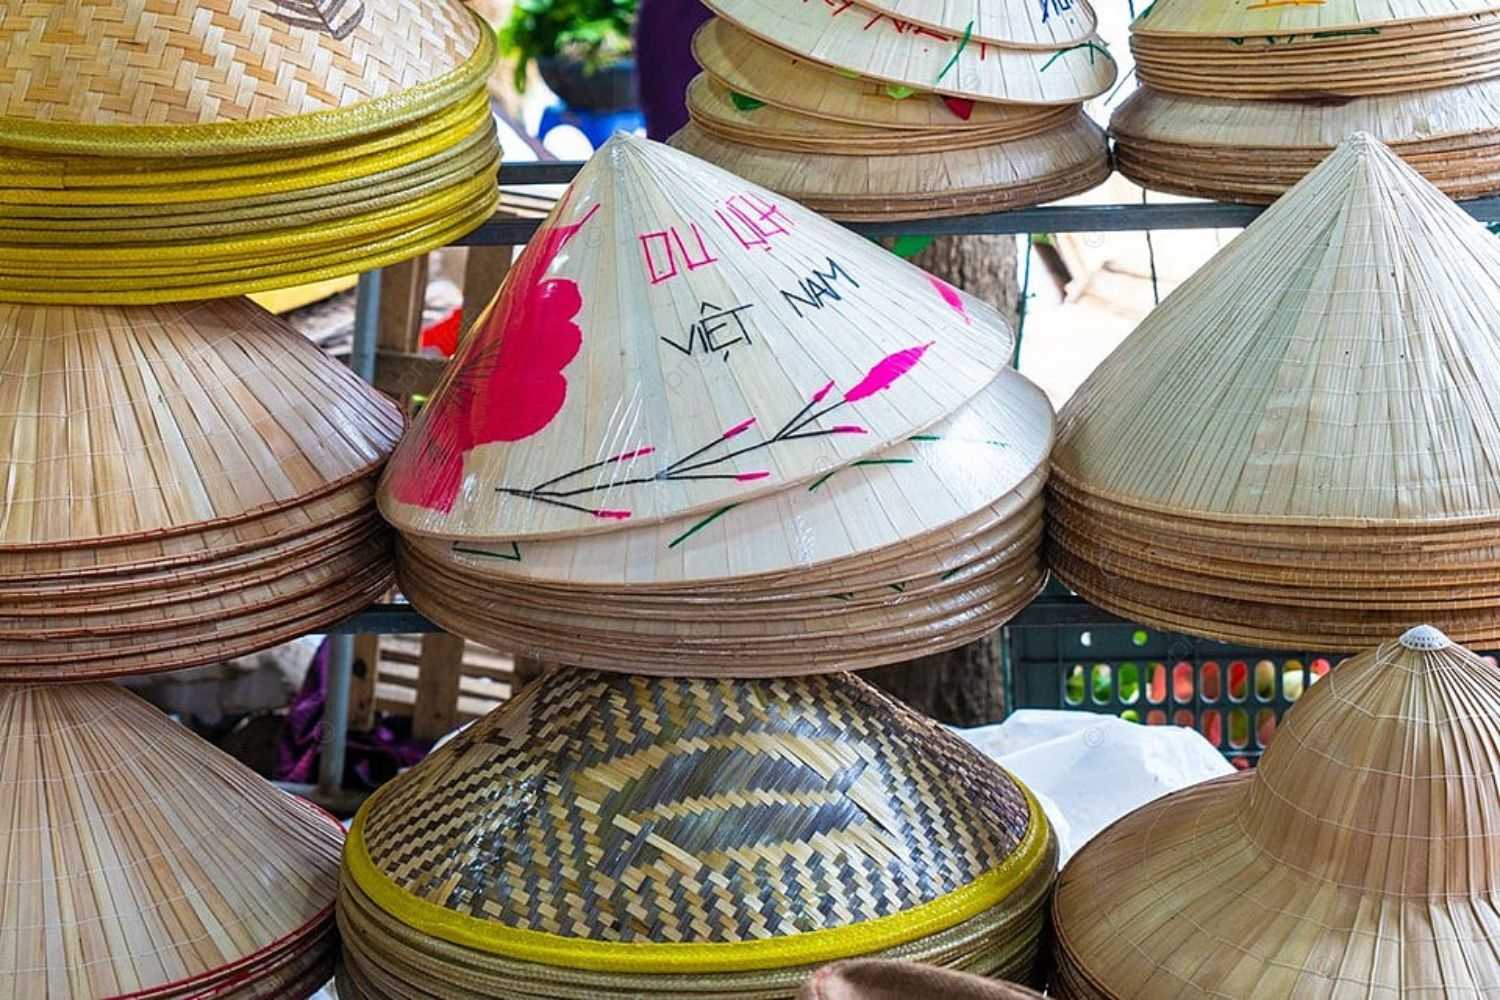 20 Traditional Vietnamese Souvenirs to Collect on Your Travels